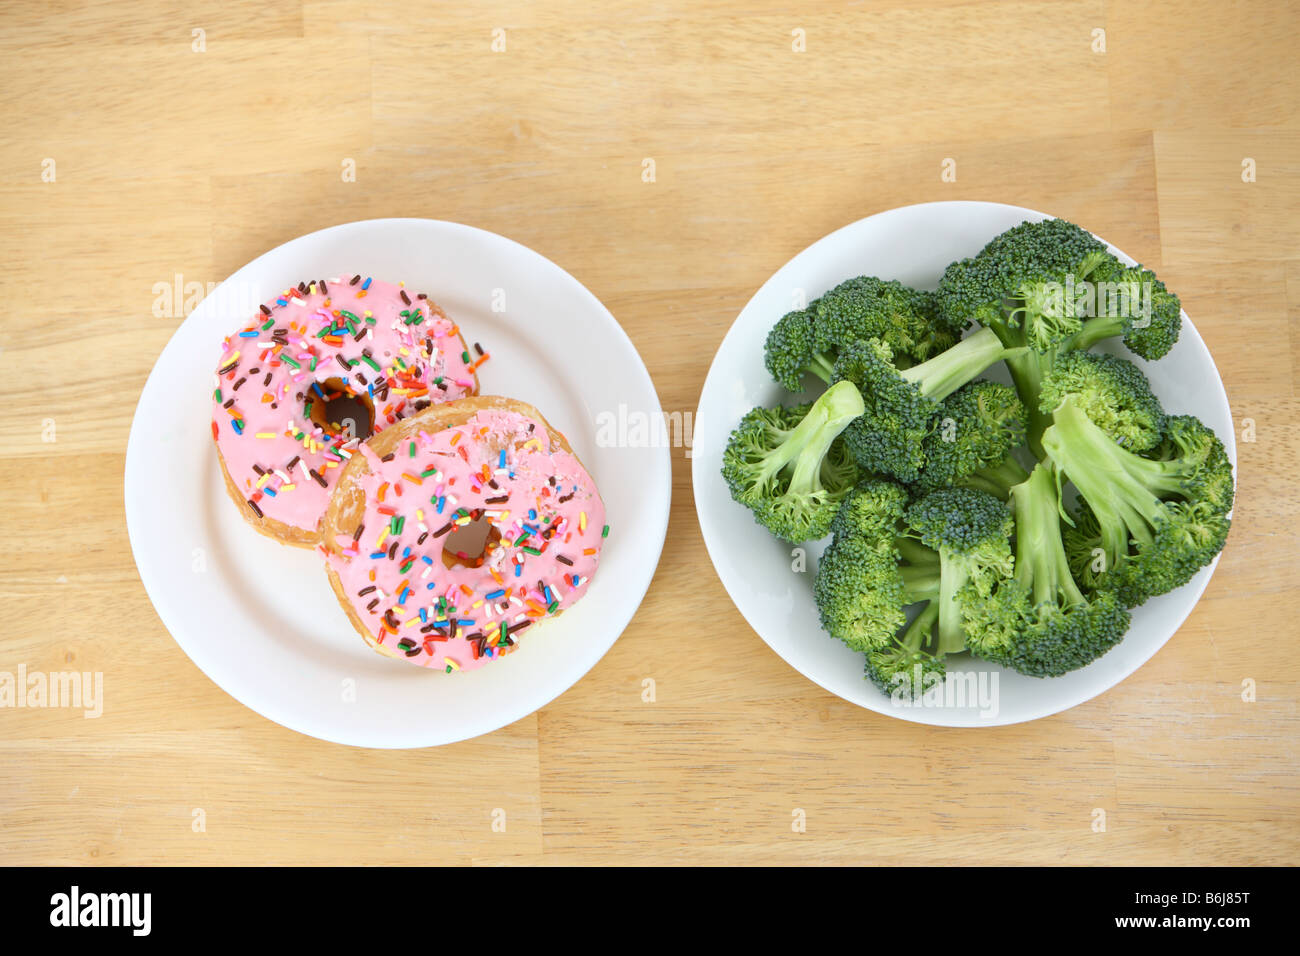 Plates of broccoli and donuts Stock Photo